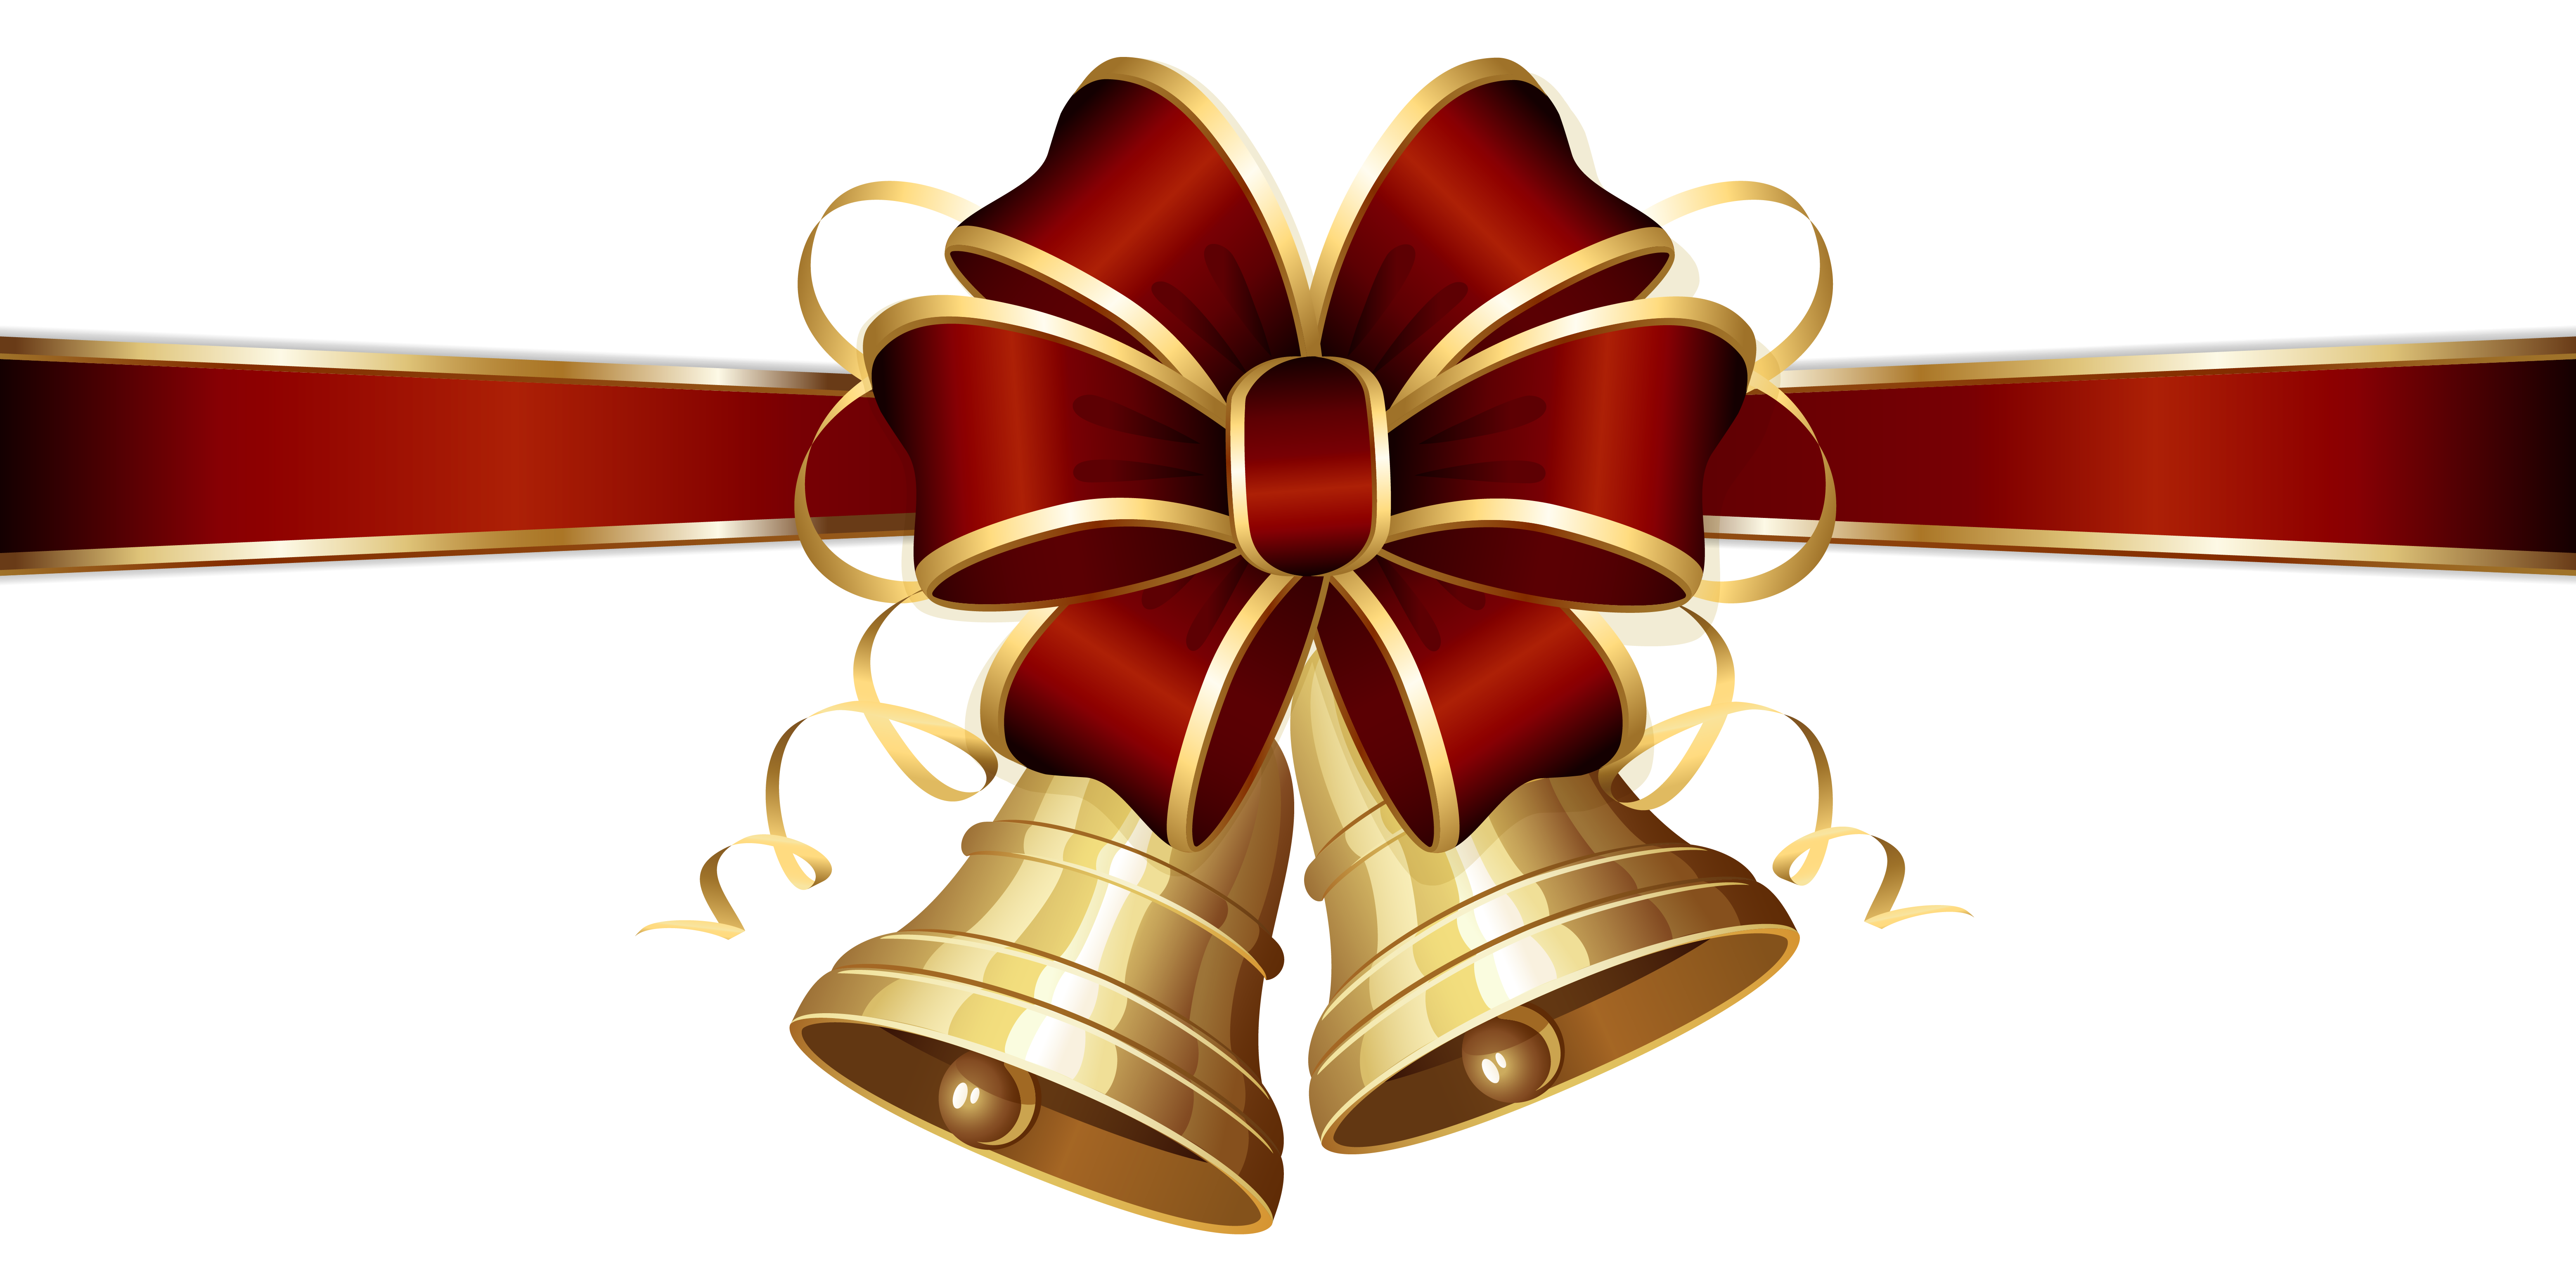 0 Result Images of Jingle Bells Png Images - PNG Image Collection